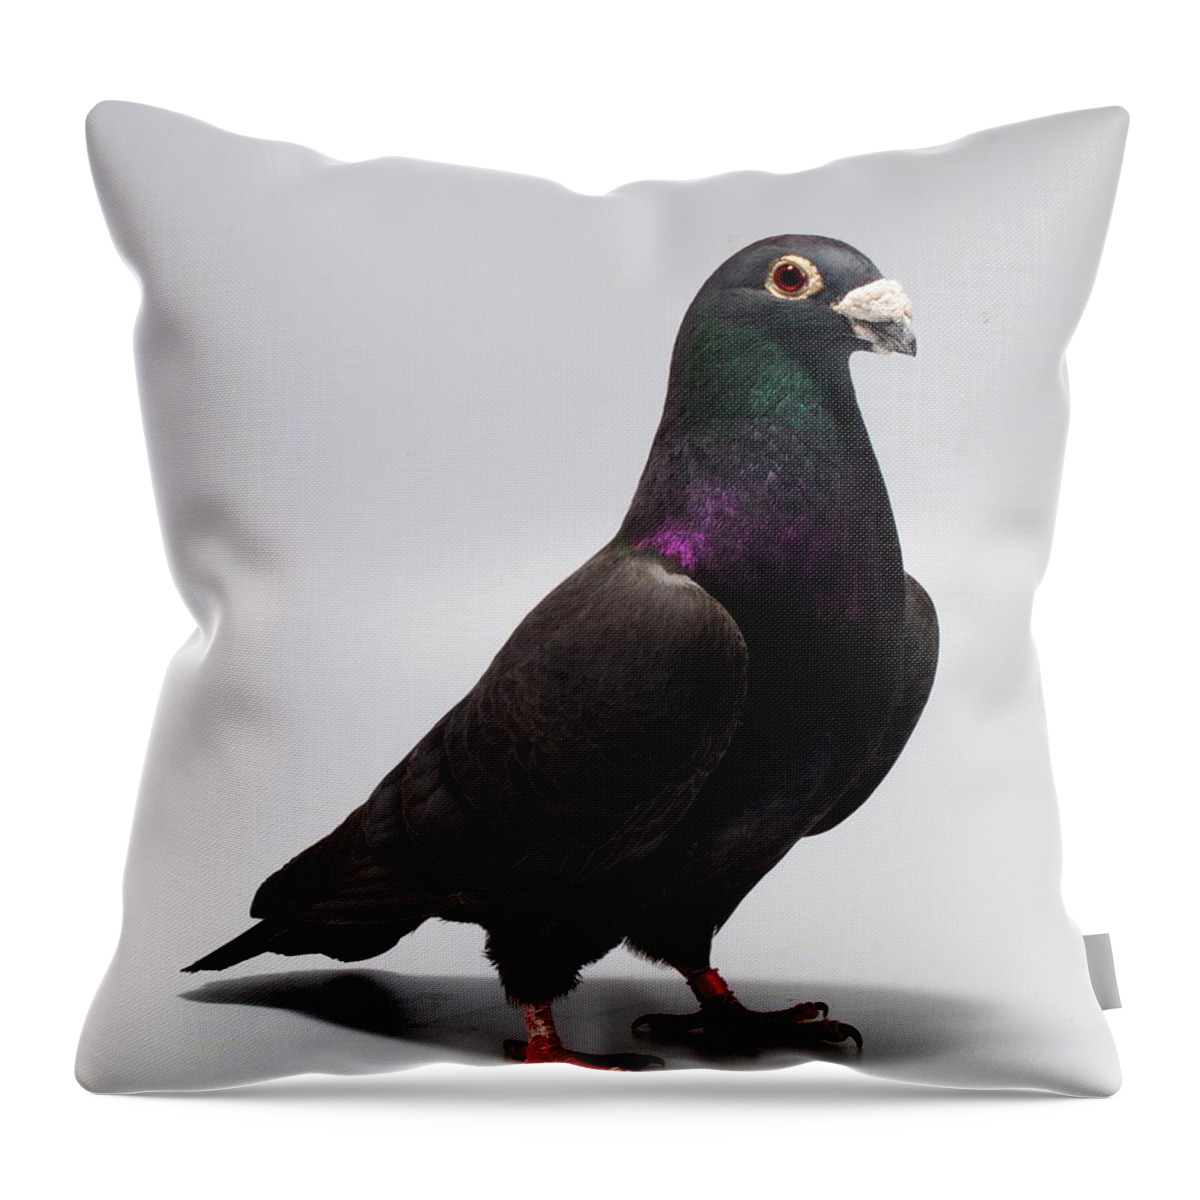 Pigeon Throw Pillow featuring the photograph Black Exhibition Homer by Nathan Abbott